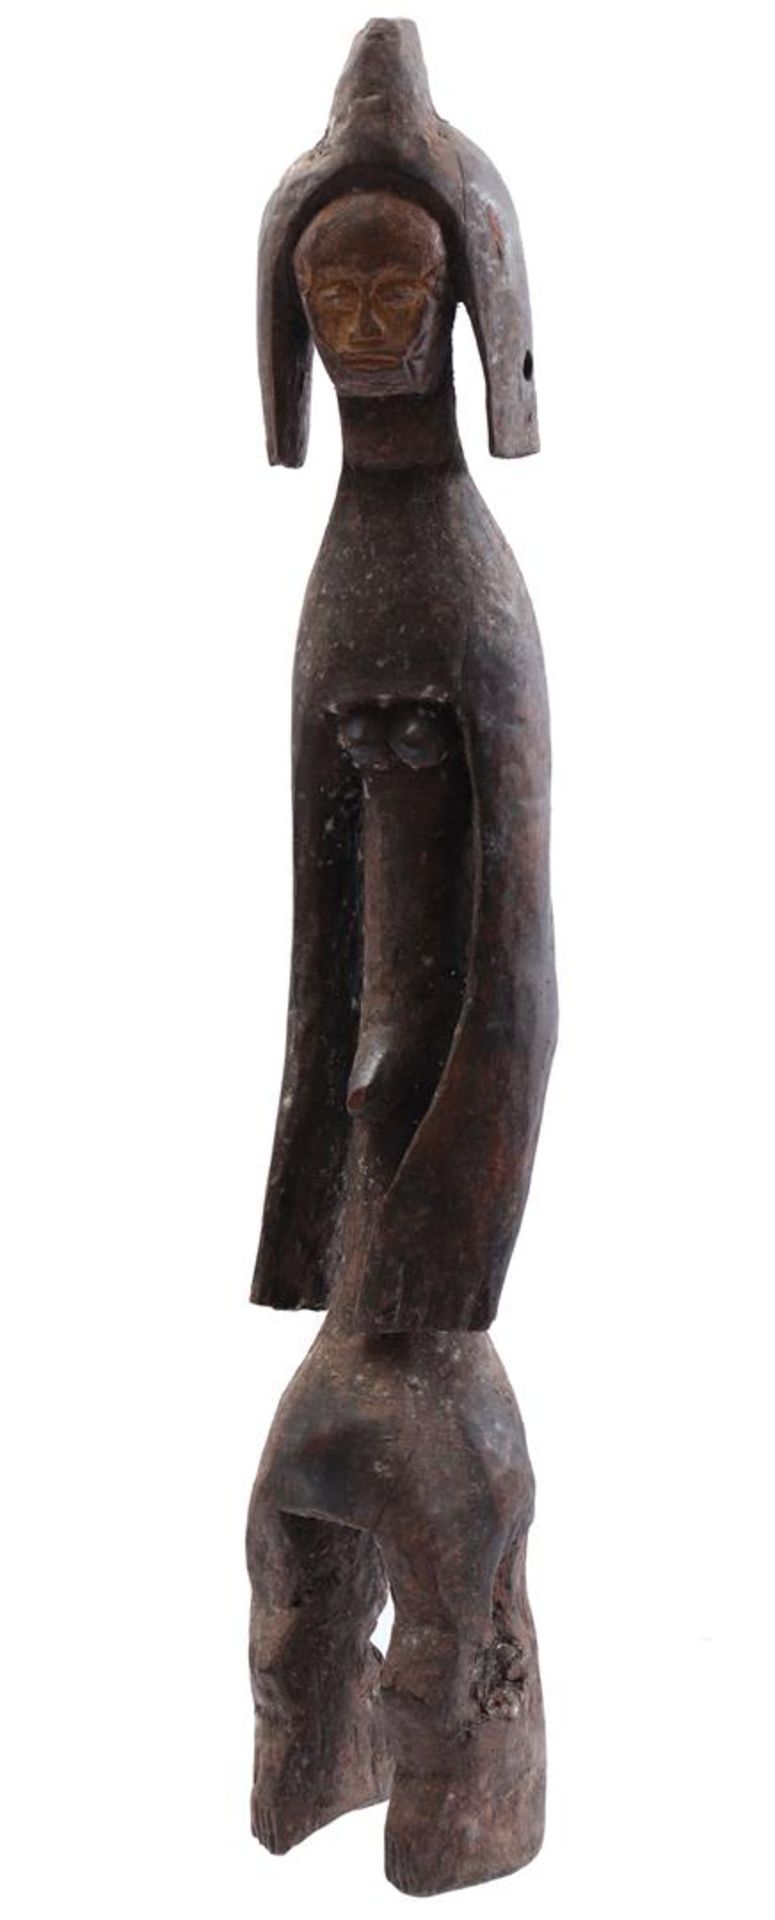 Wooden ceremonial statue of a woman - Image 4 of 5